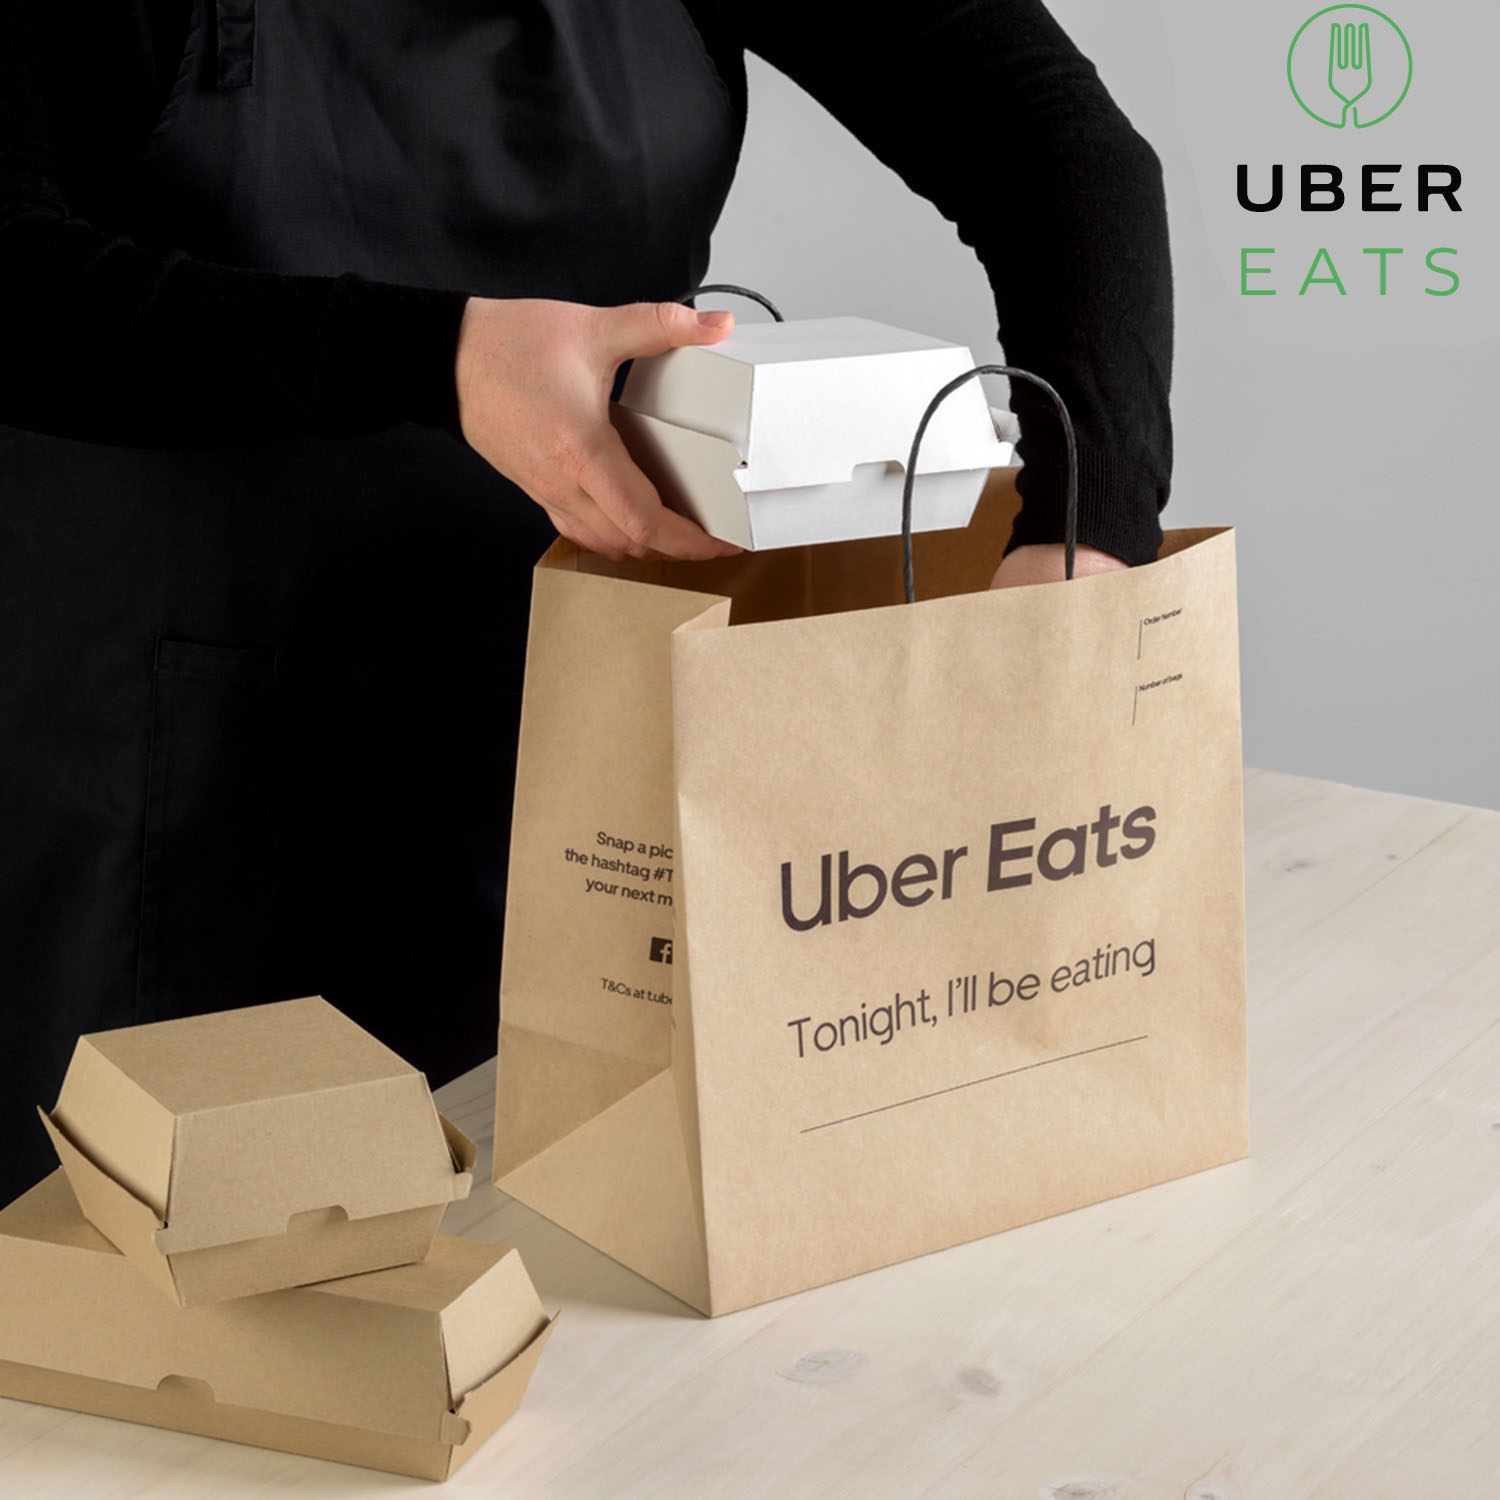 2. UBER EATS DELIVERY